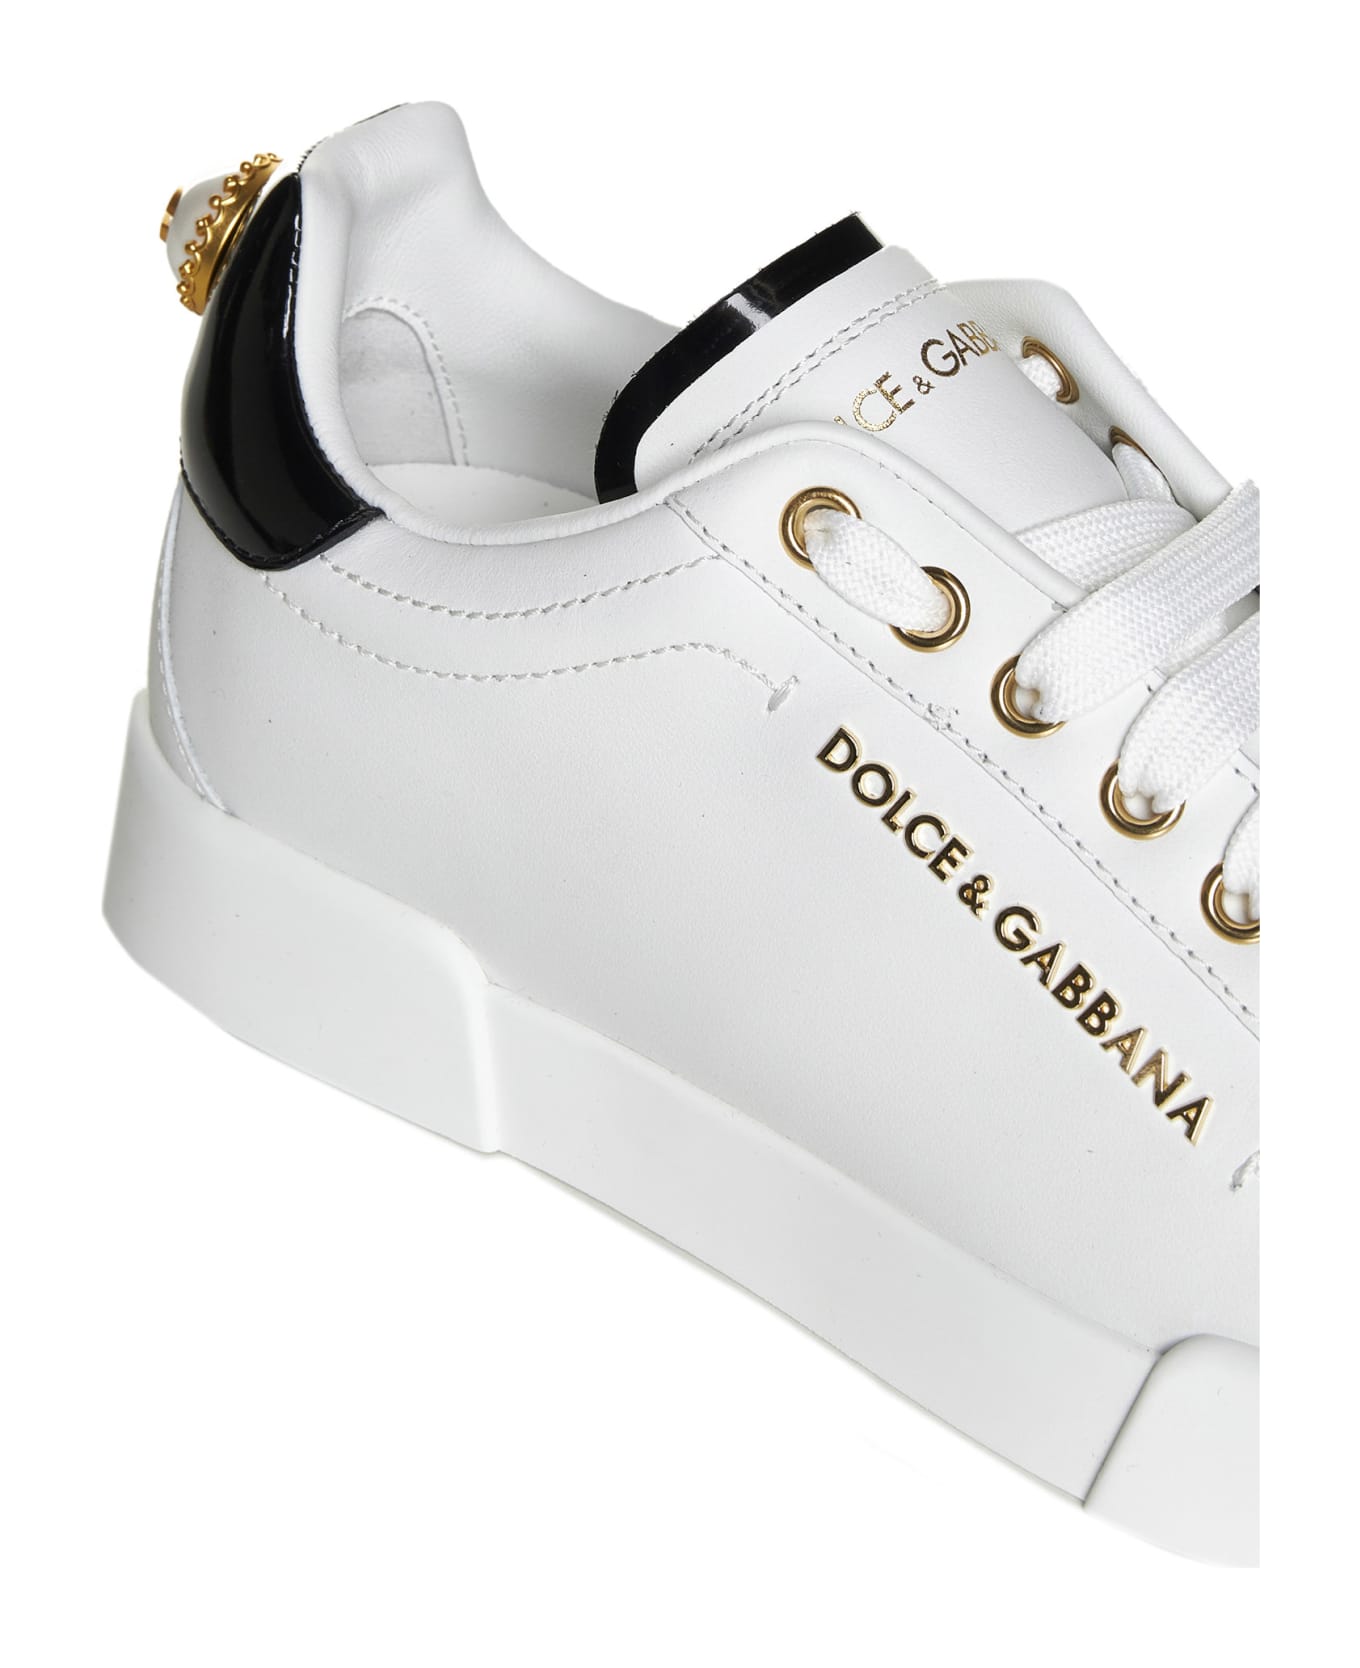 Dolce & Gabbana Embellished Sneakers - White